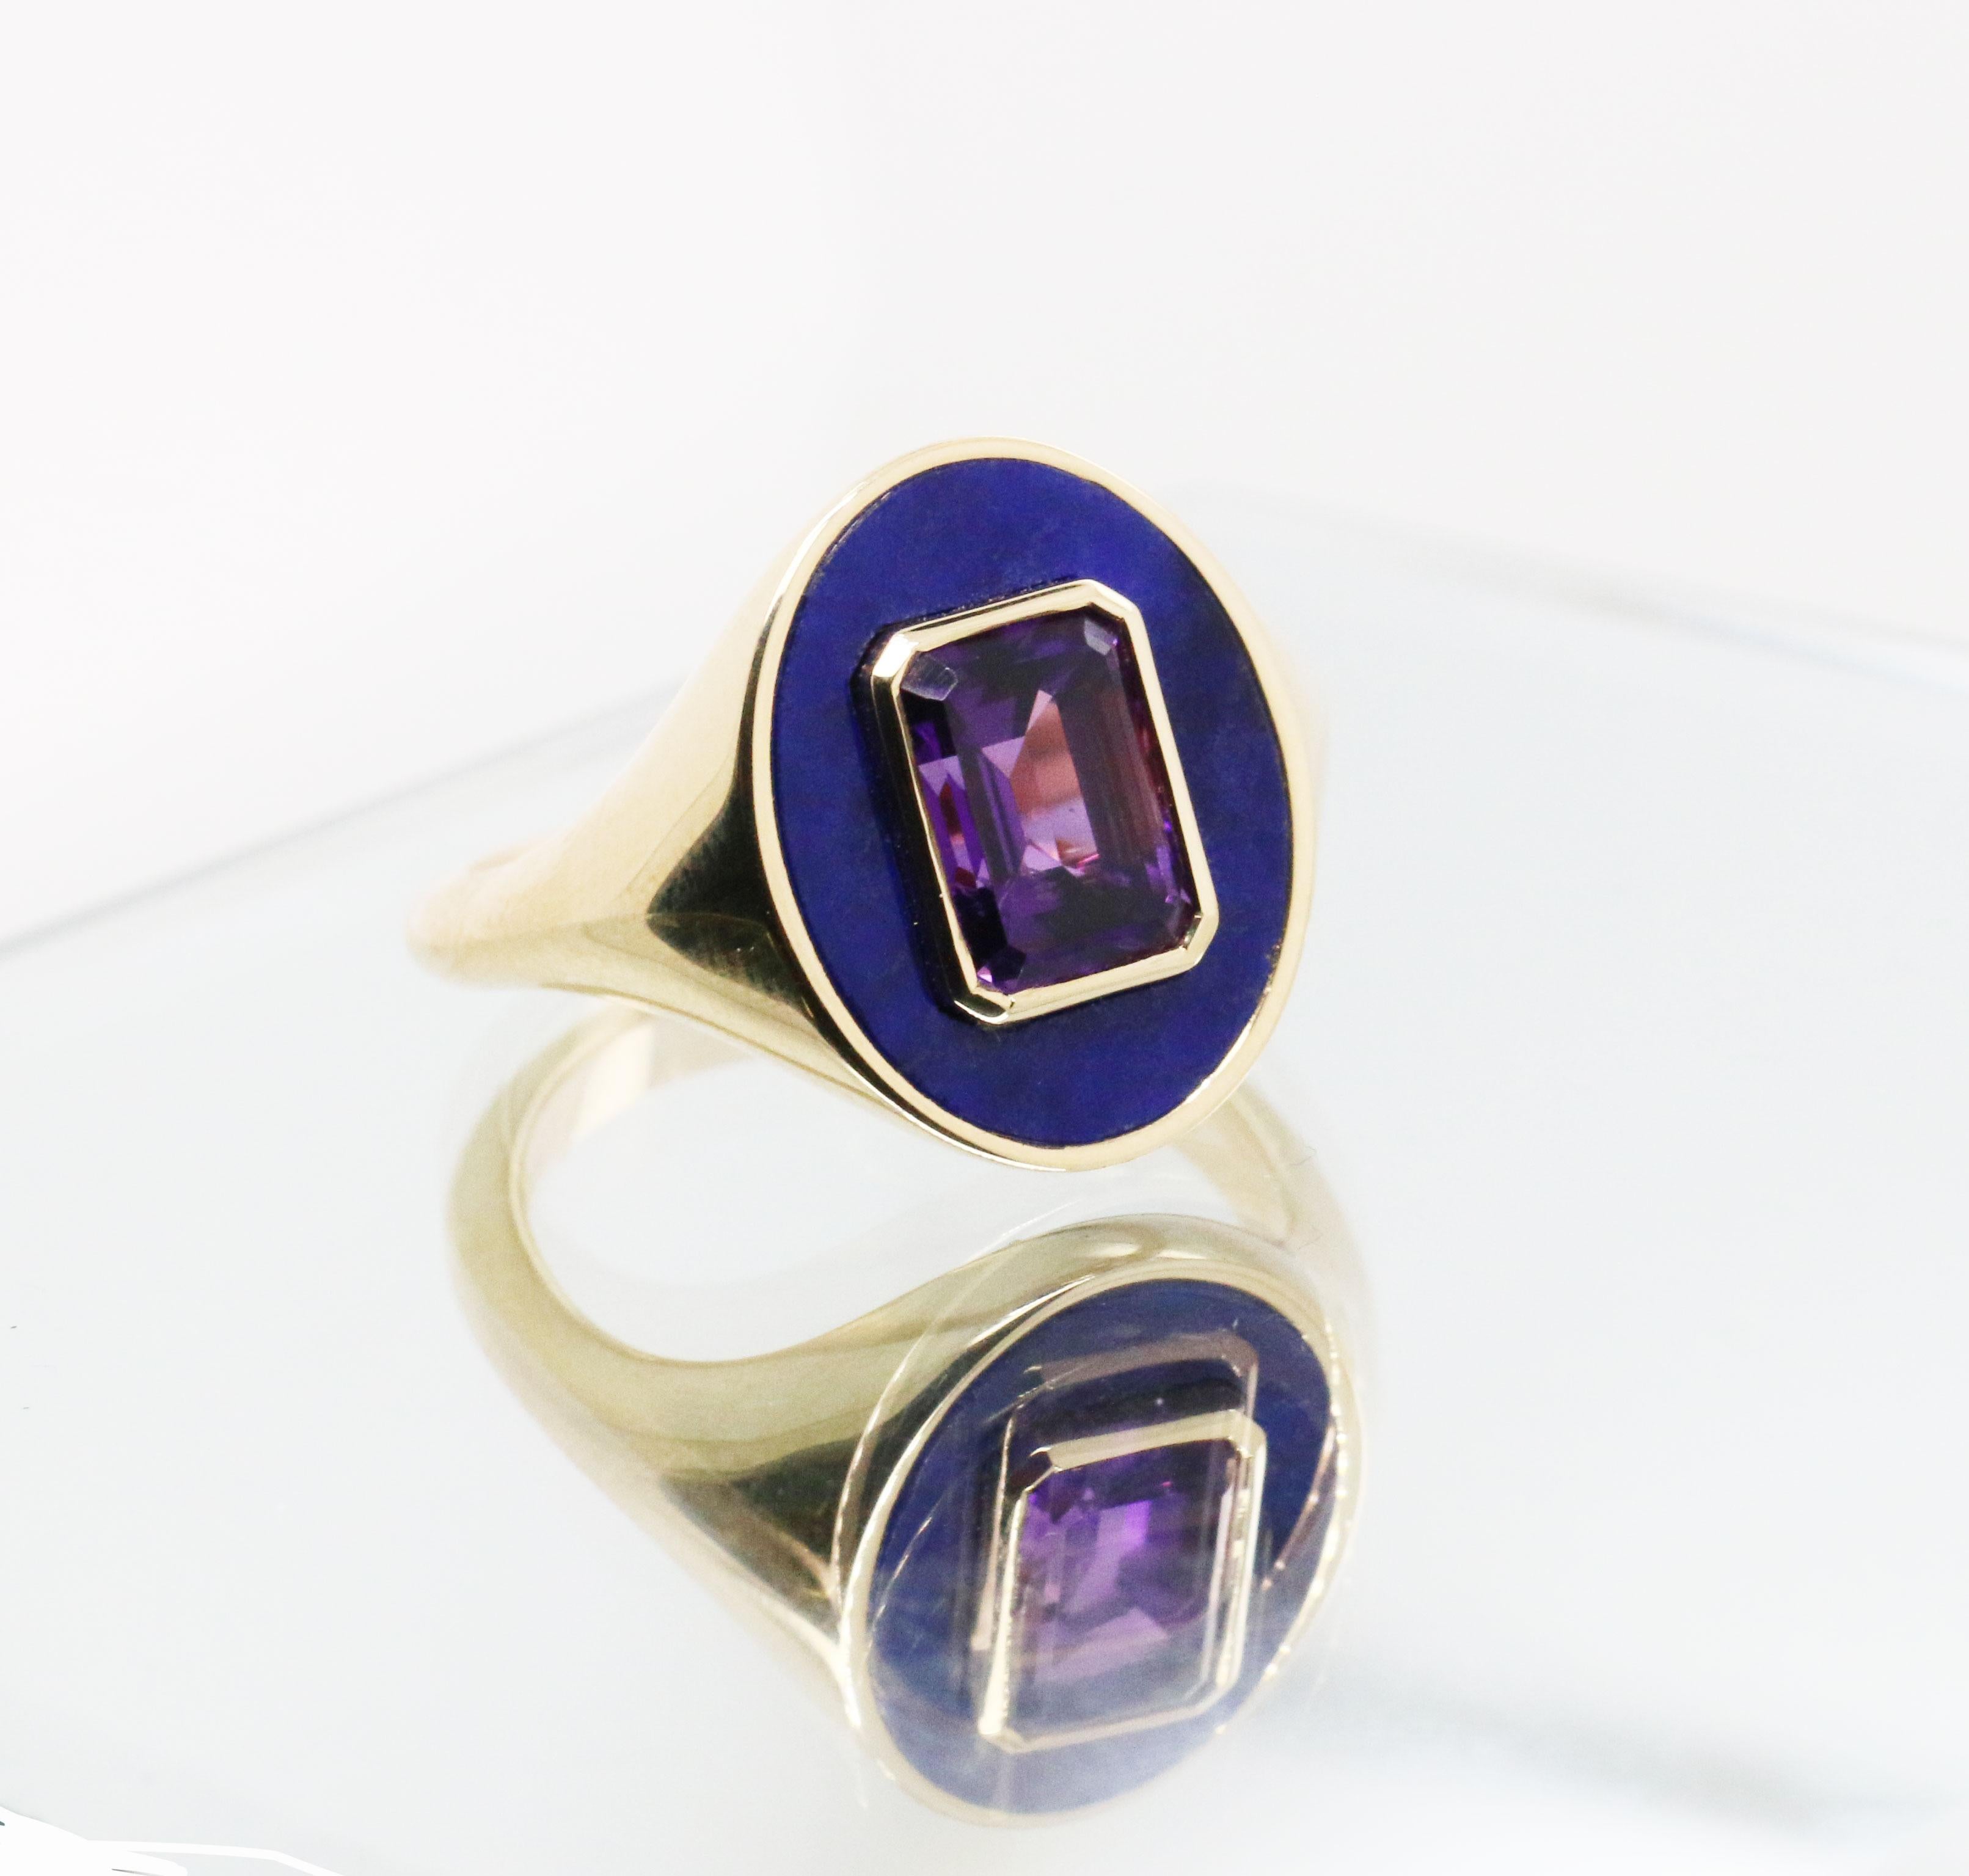 For Sale:  Lapis and Amethyst Namesake Signet Ring in 18ct Yellow Gold 5